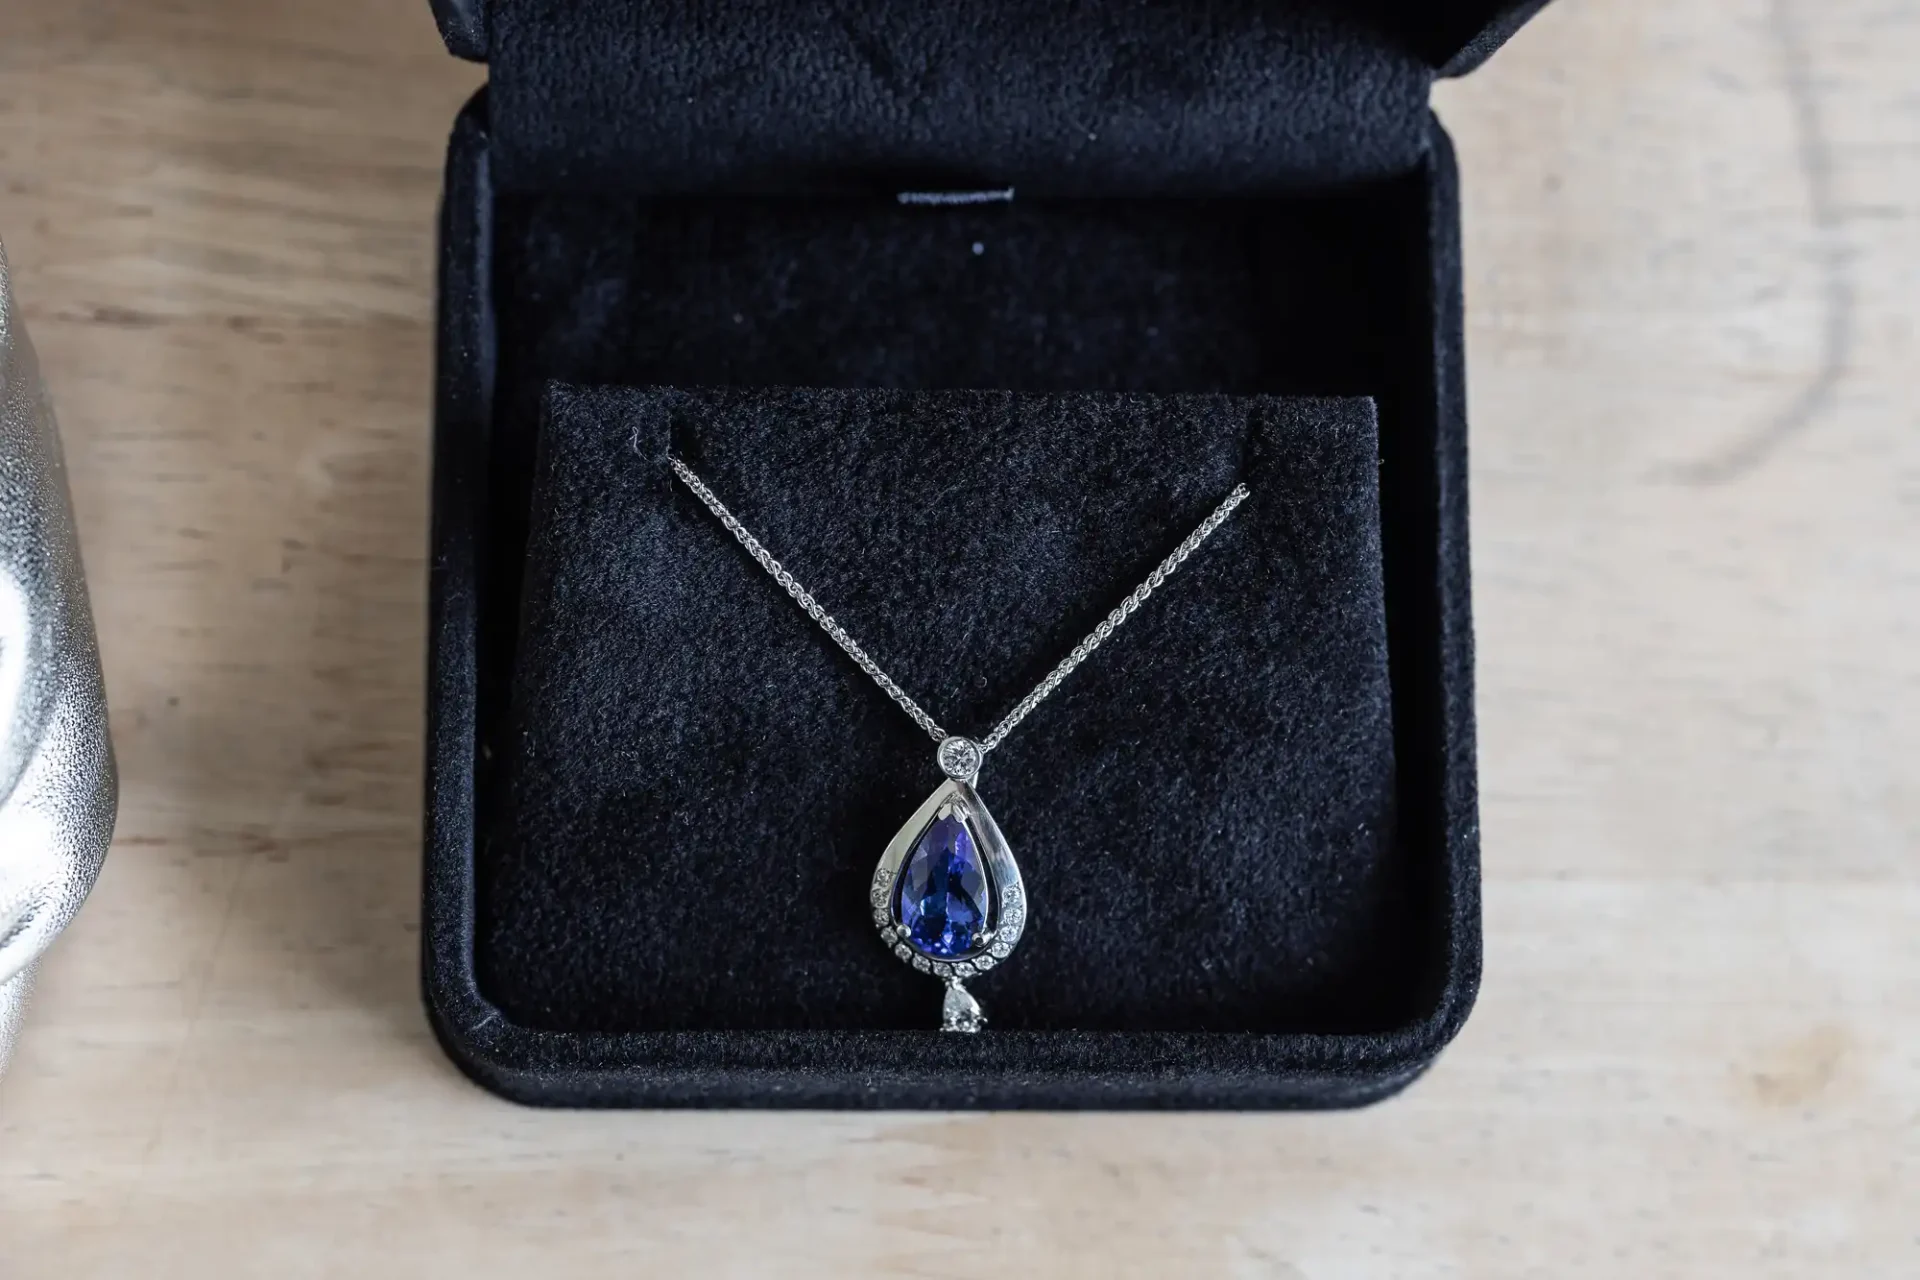 A teardrop-shaped sapphire and diamond necklace in a black jewelry box on a wooden surface.